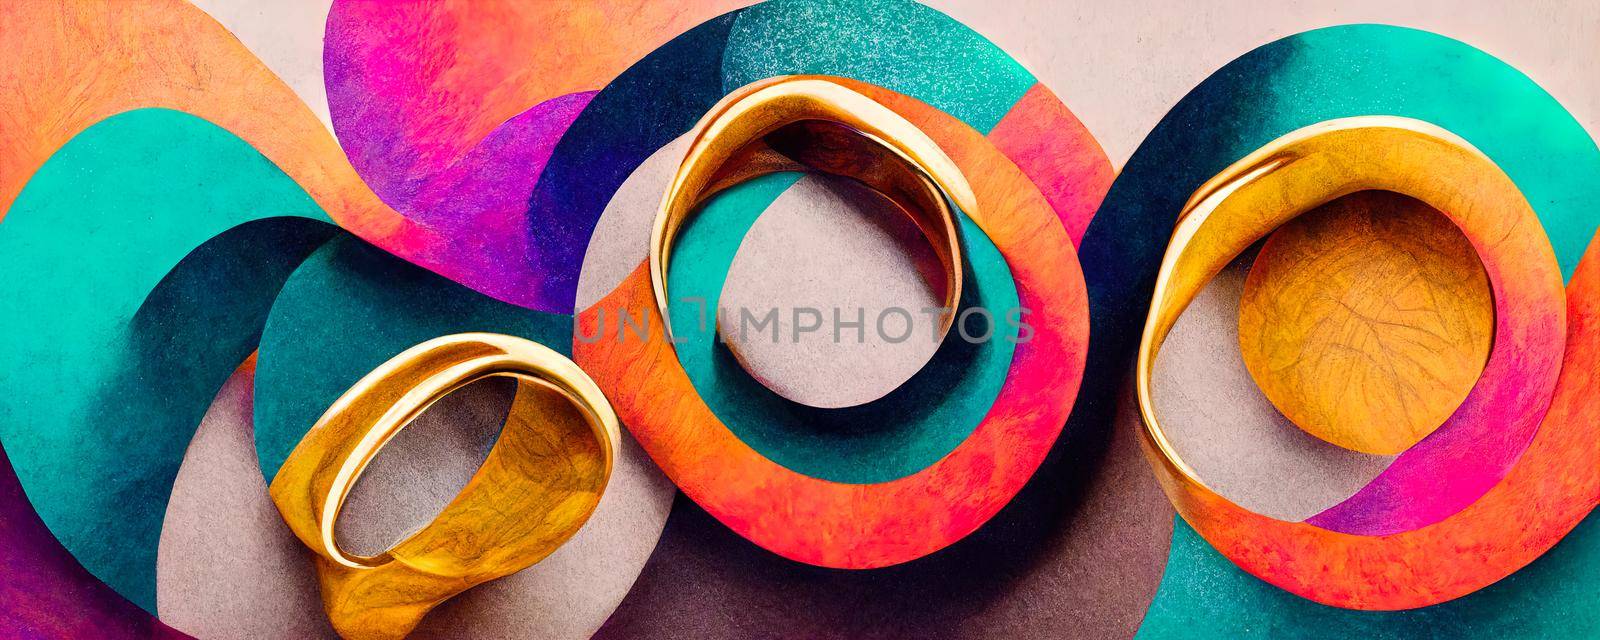 golden colored ring-shaped textures in the form of circles.